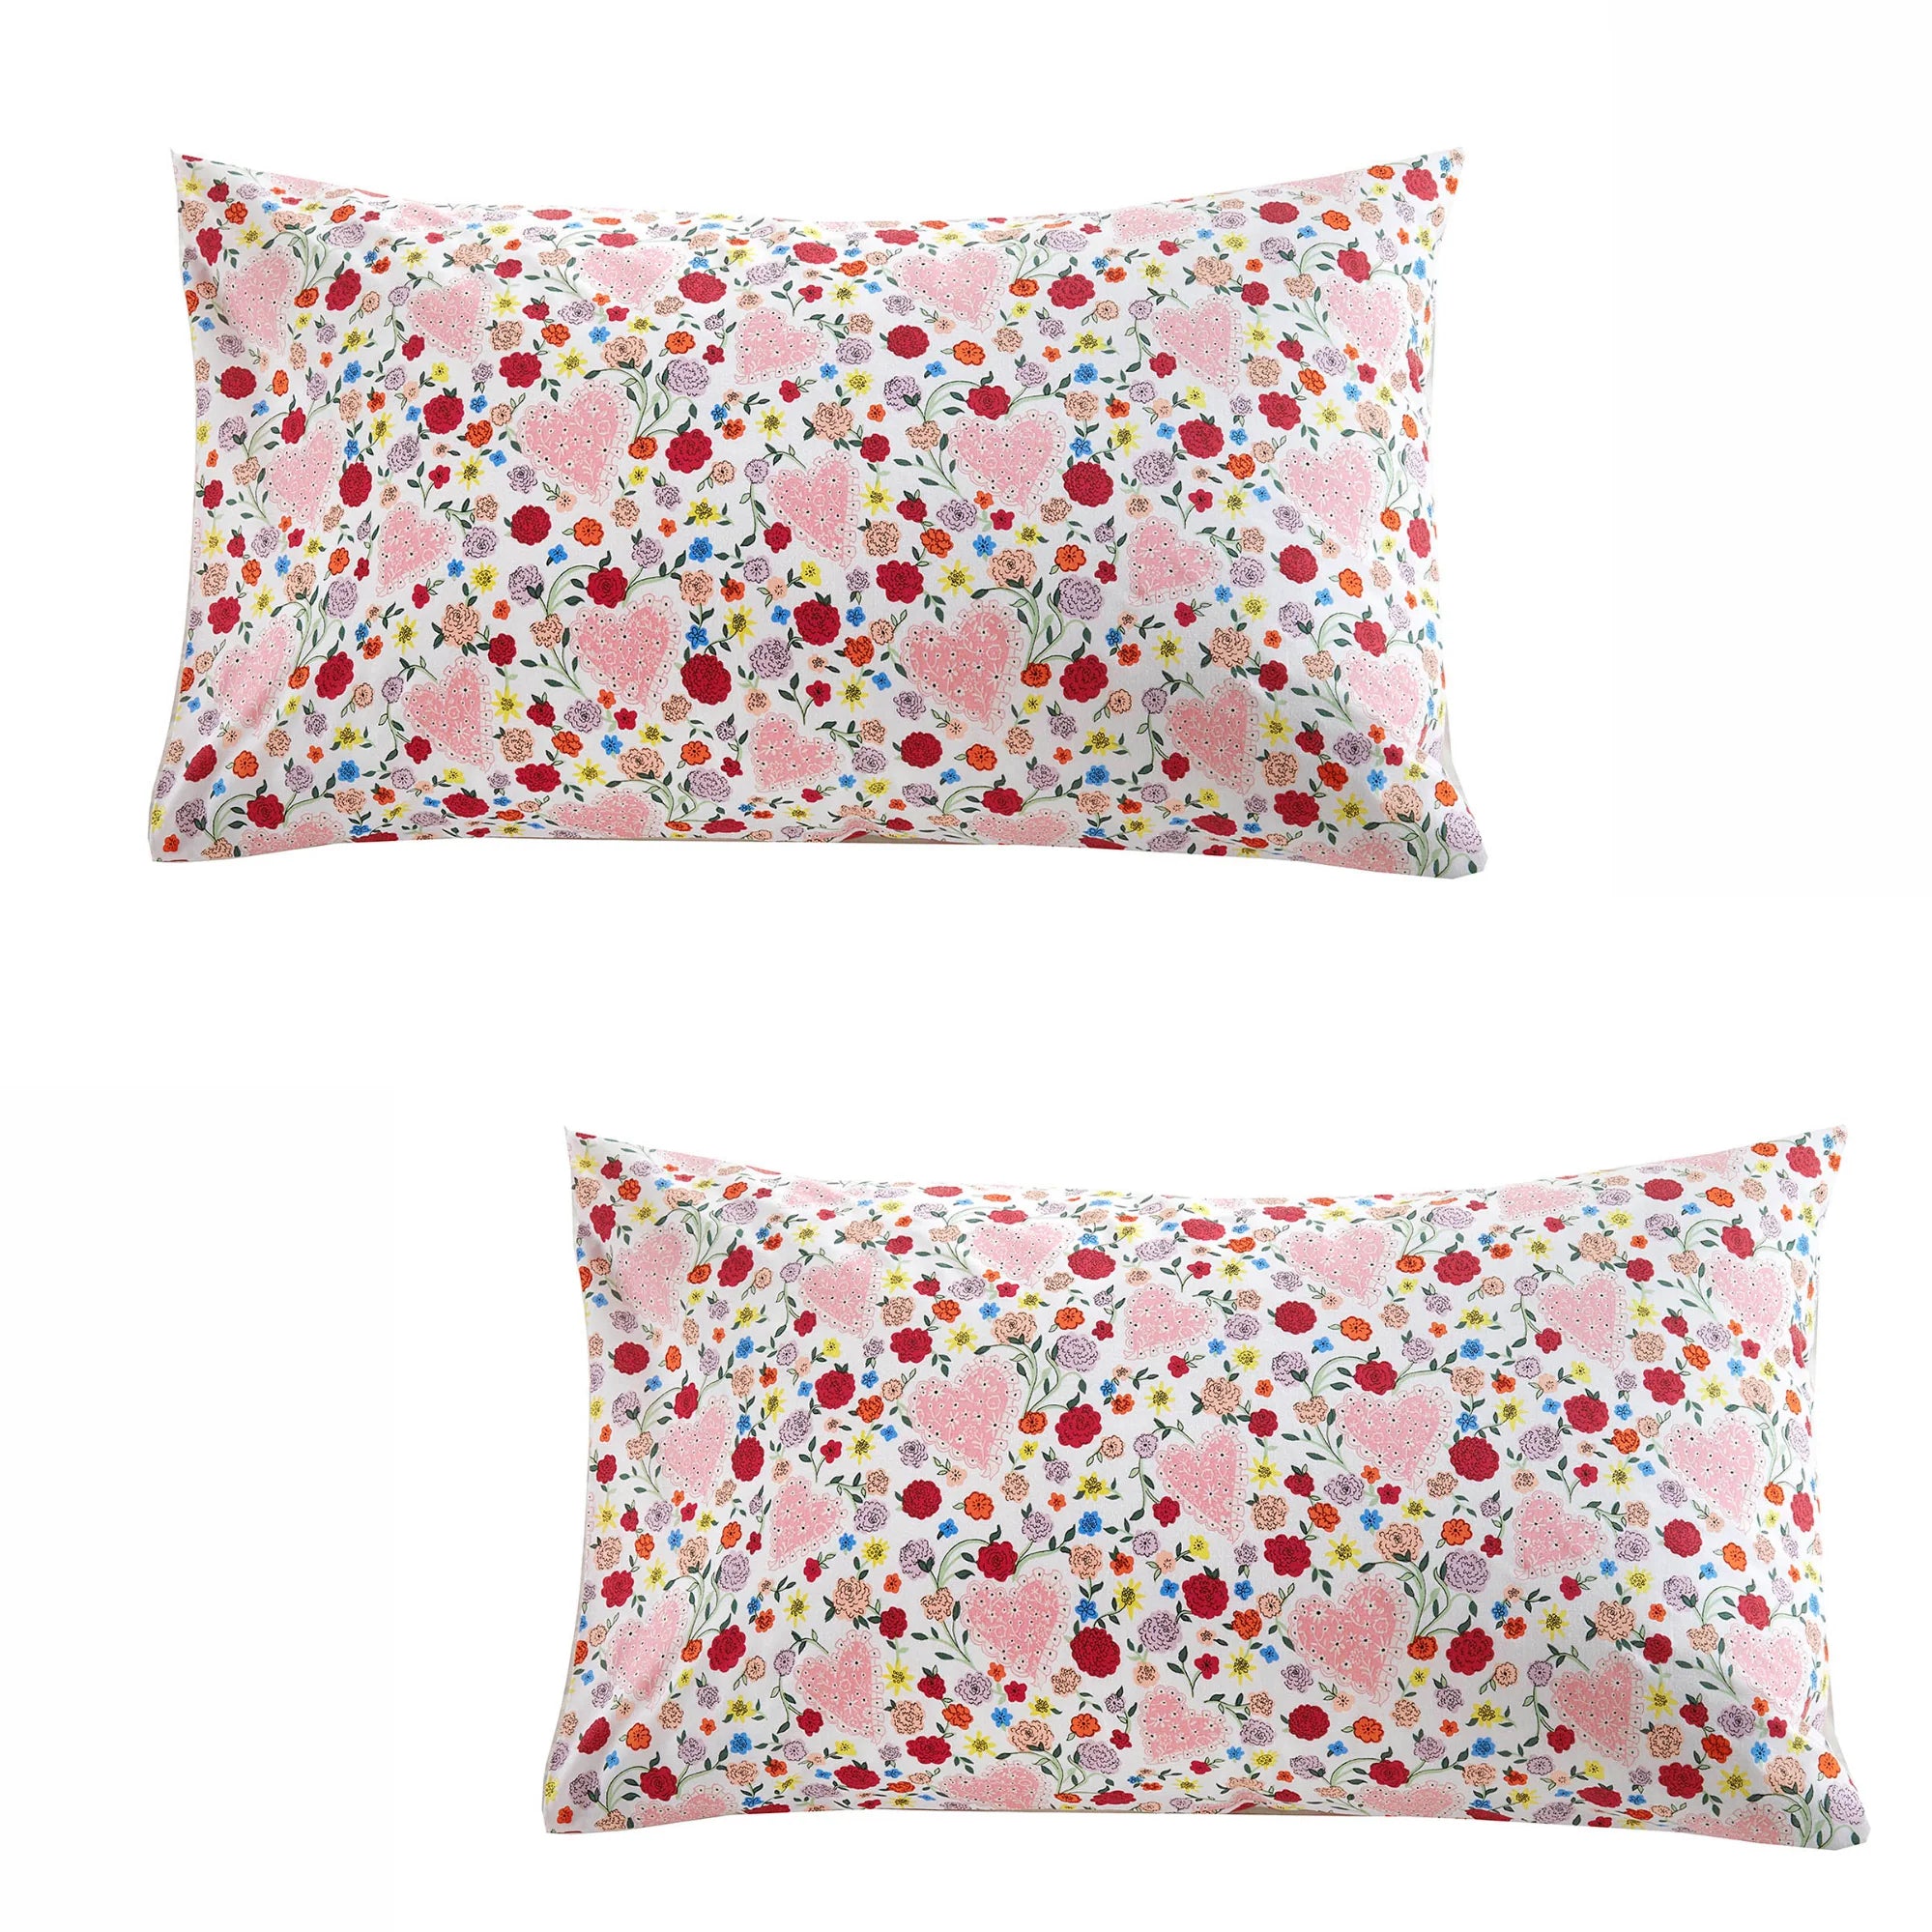 Cath Kidston Floral Heart Duvet Cover Set - Frill Pink